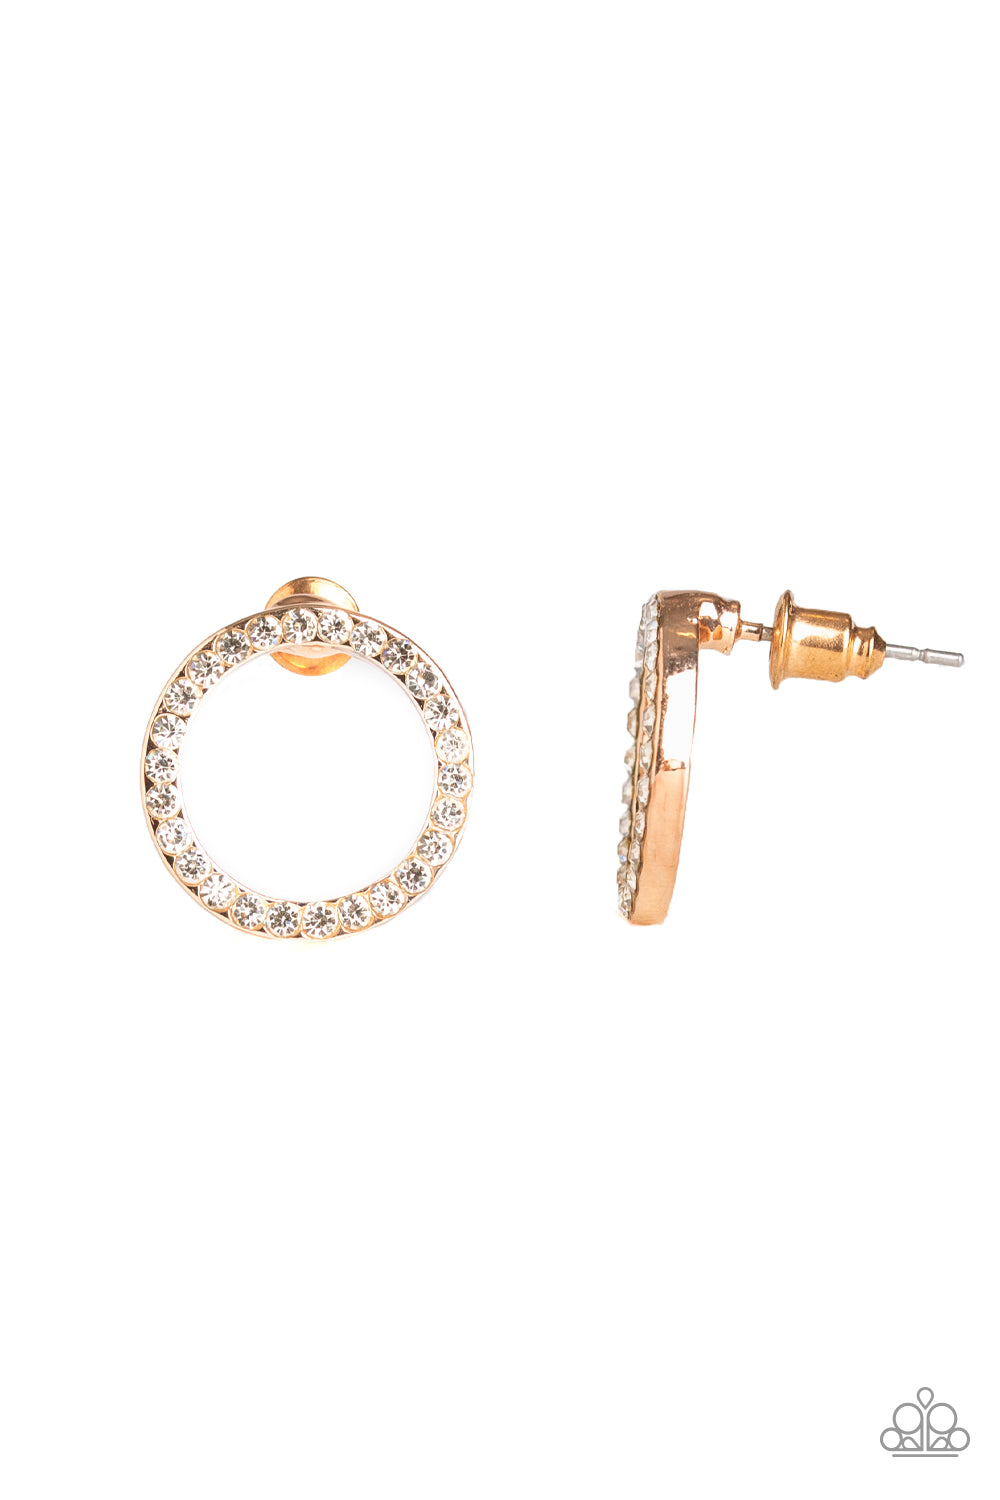 shop-sassy-affordable- 5th-ave-angel-rose-gold-paparazzi-accessories